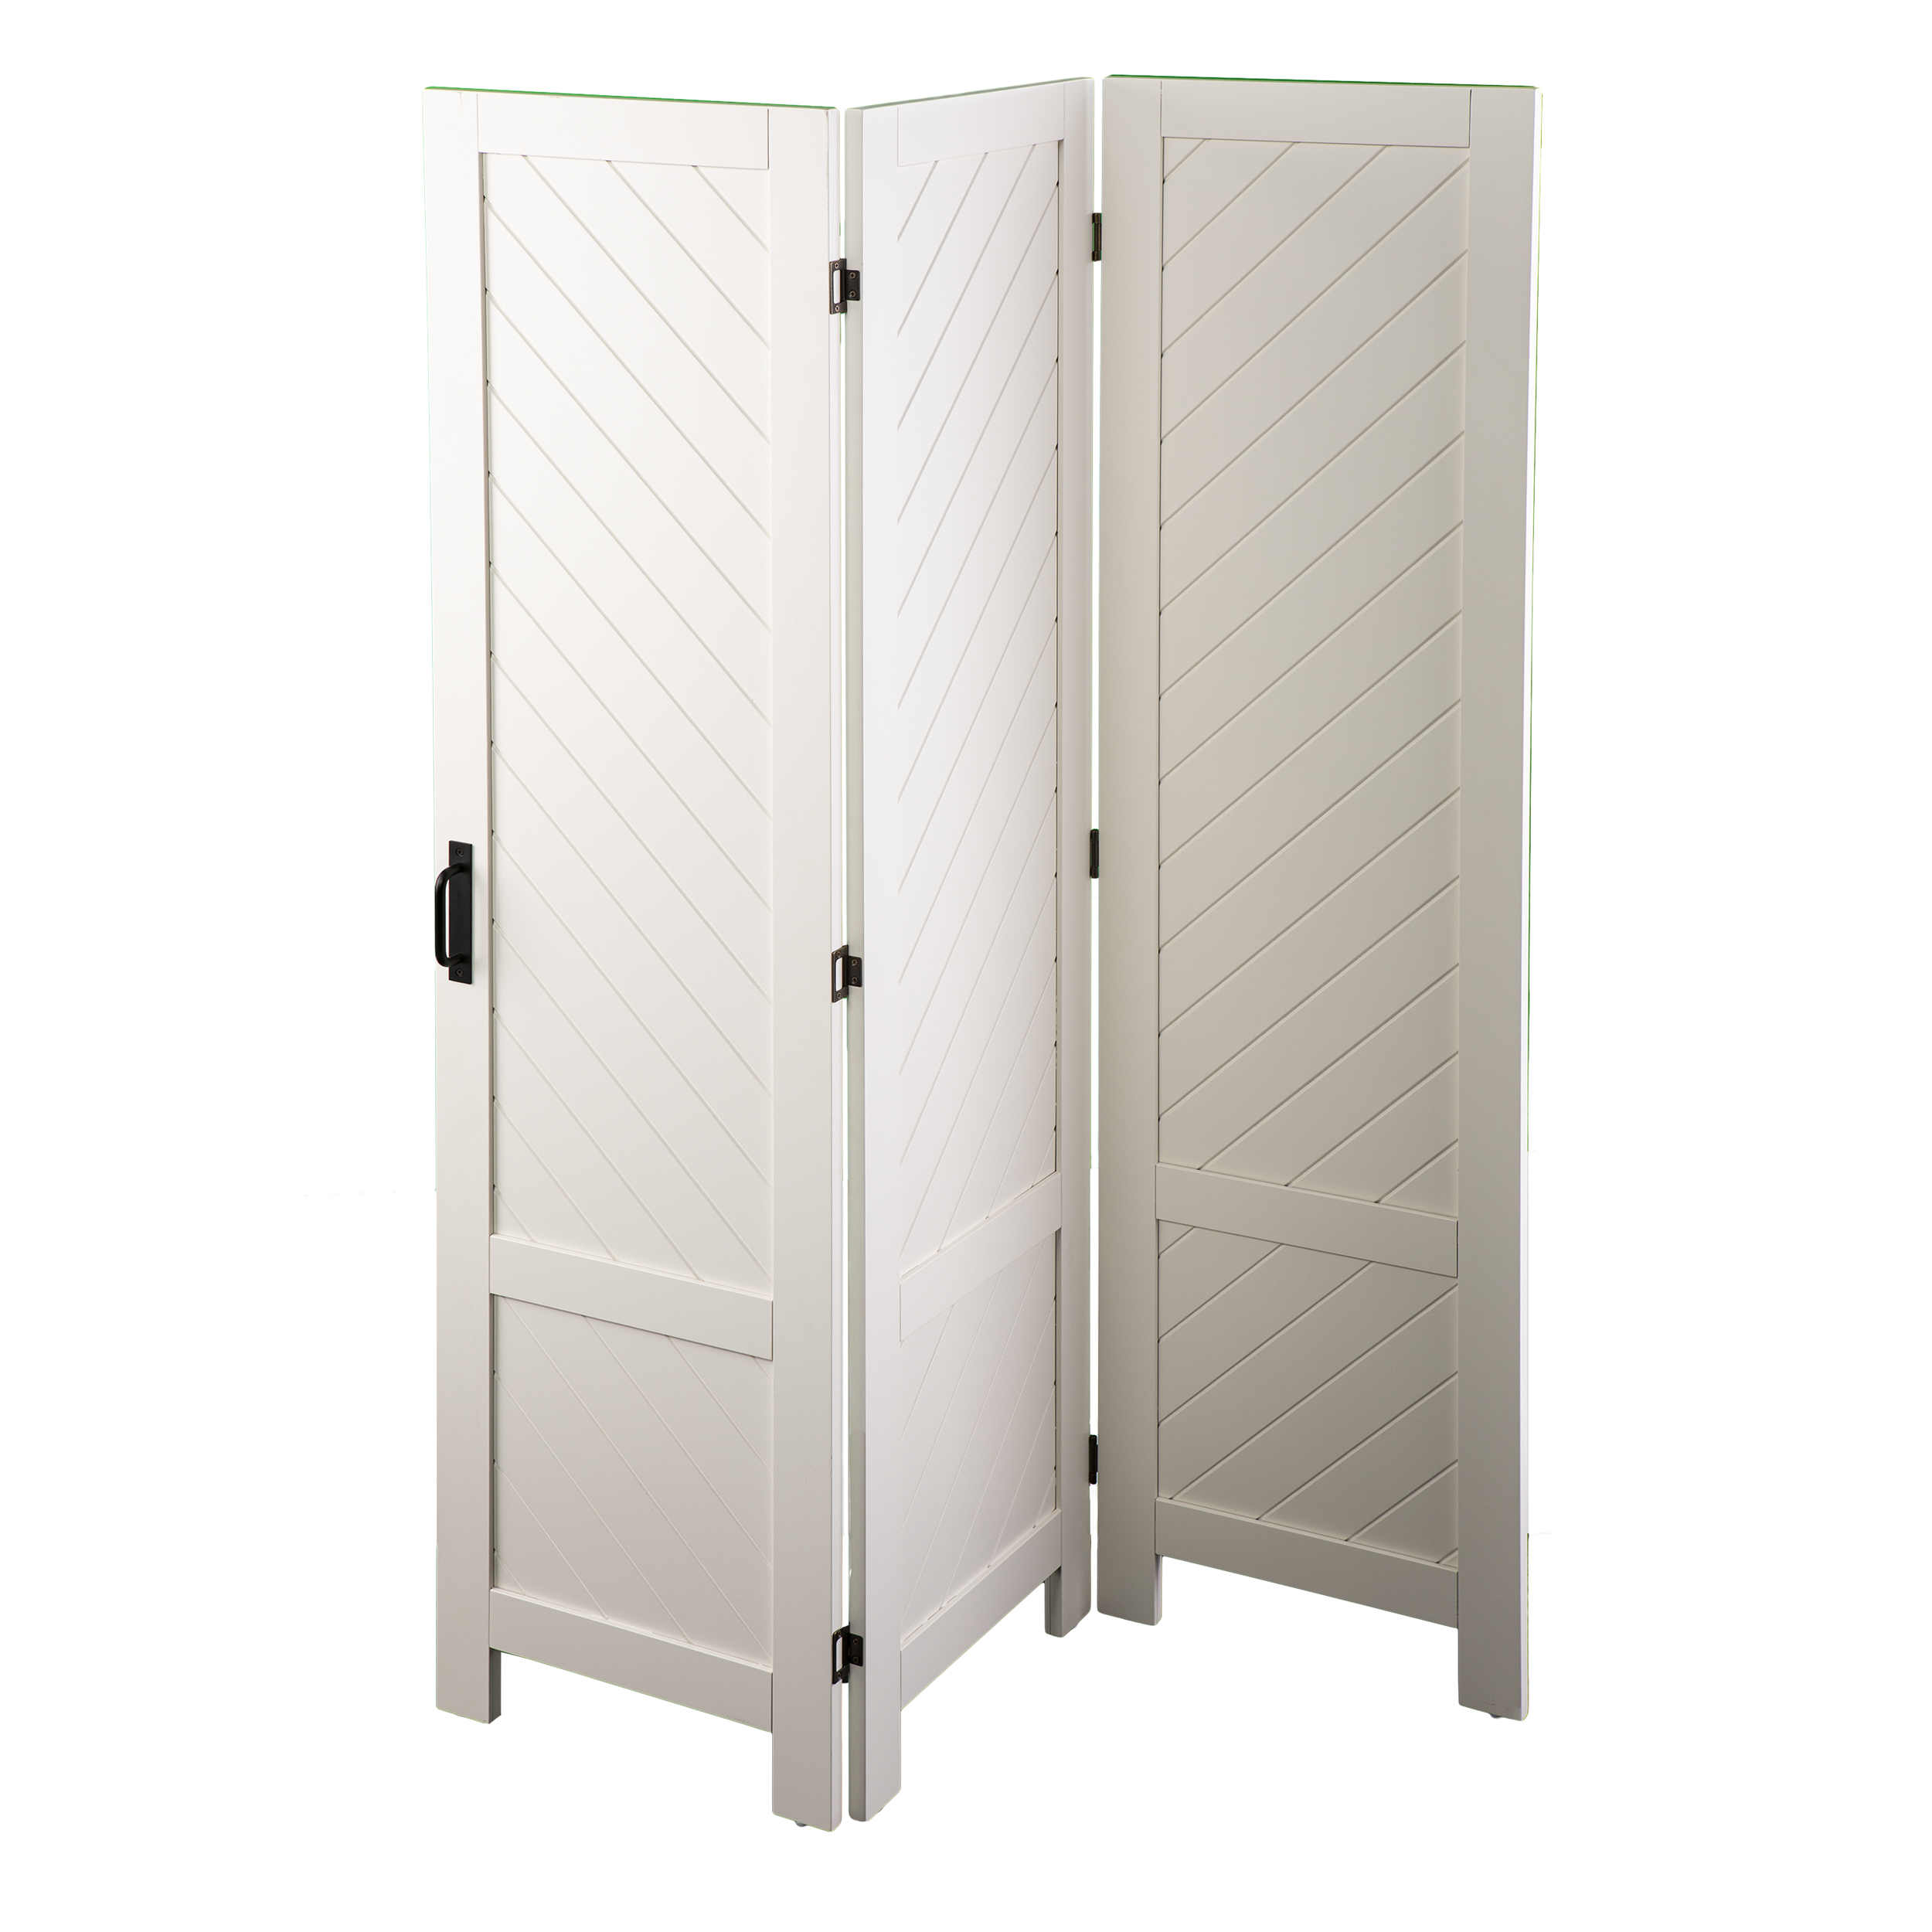 Southern Enterprises Trileigh Modern Farmhouse Style 3-Panel Room Divider in White finish - image 5 of 7